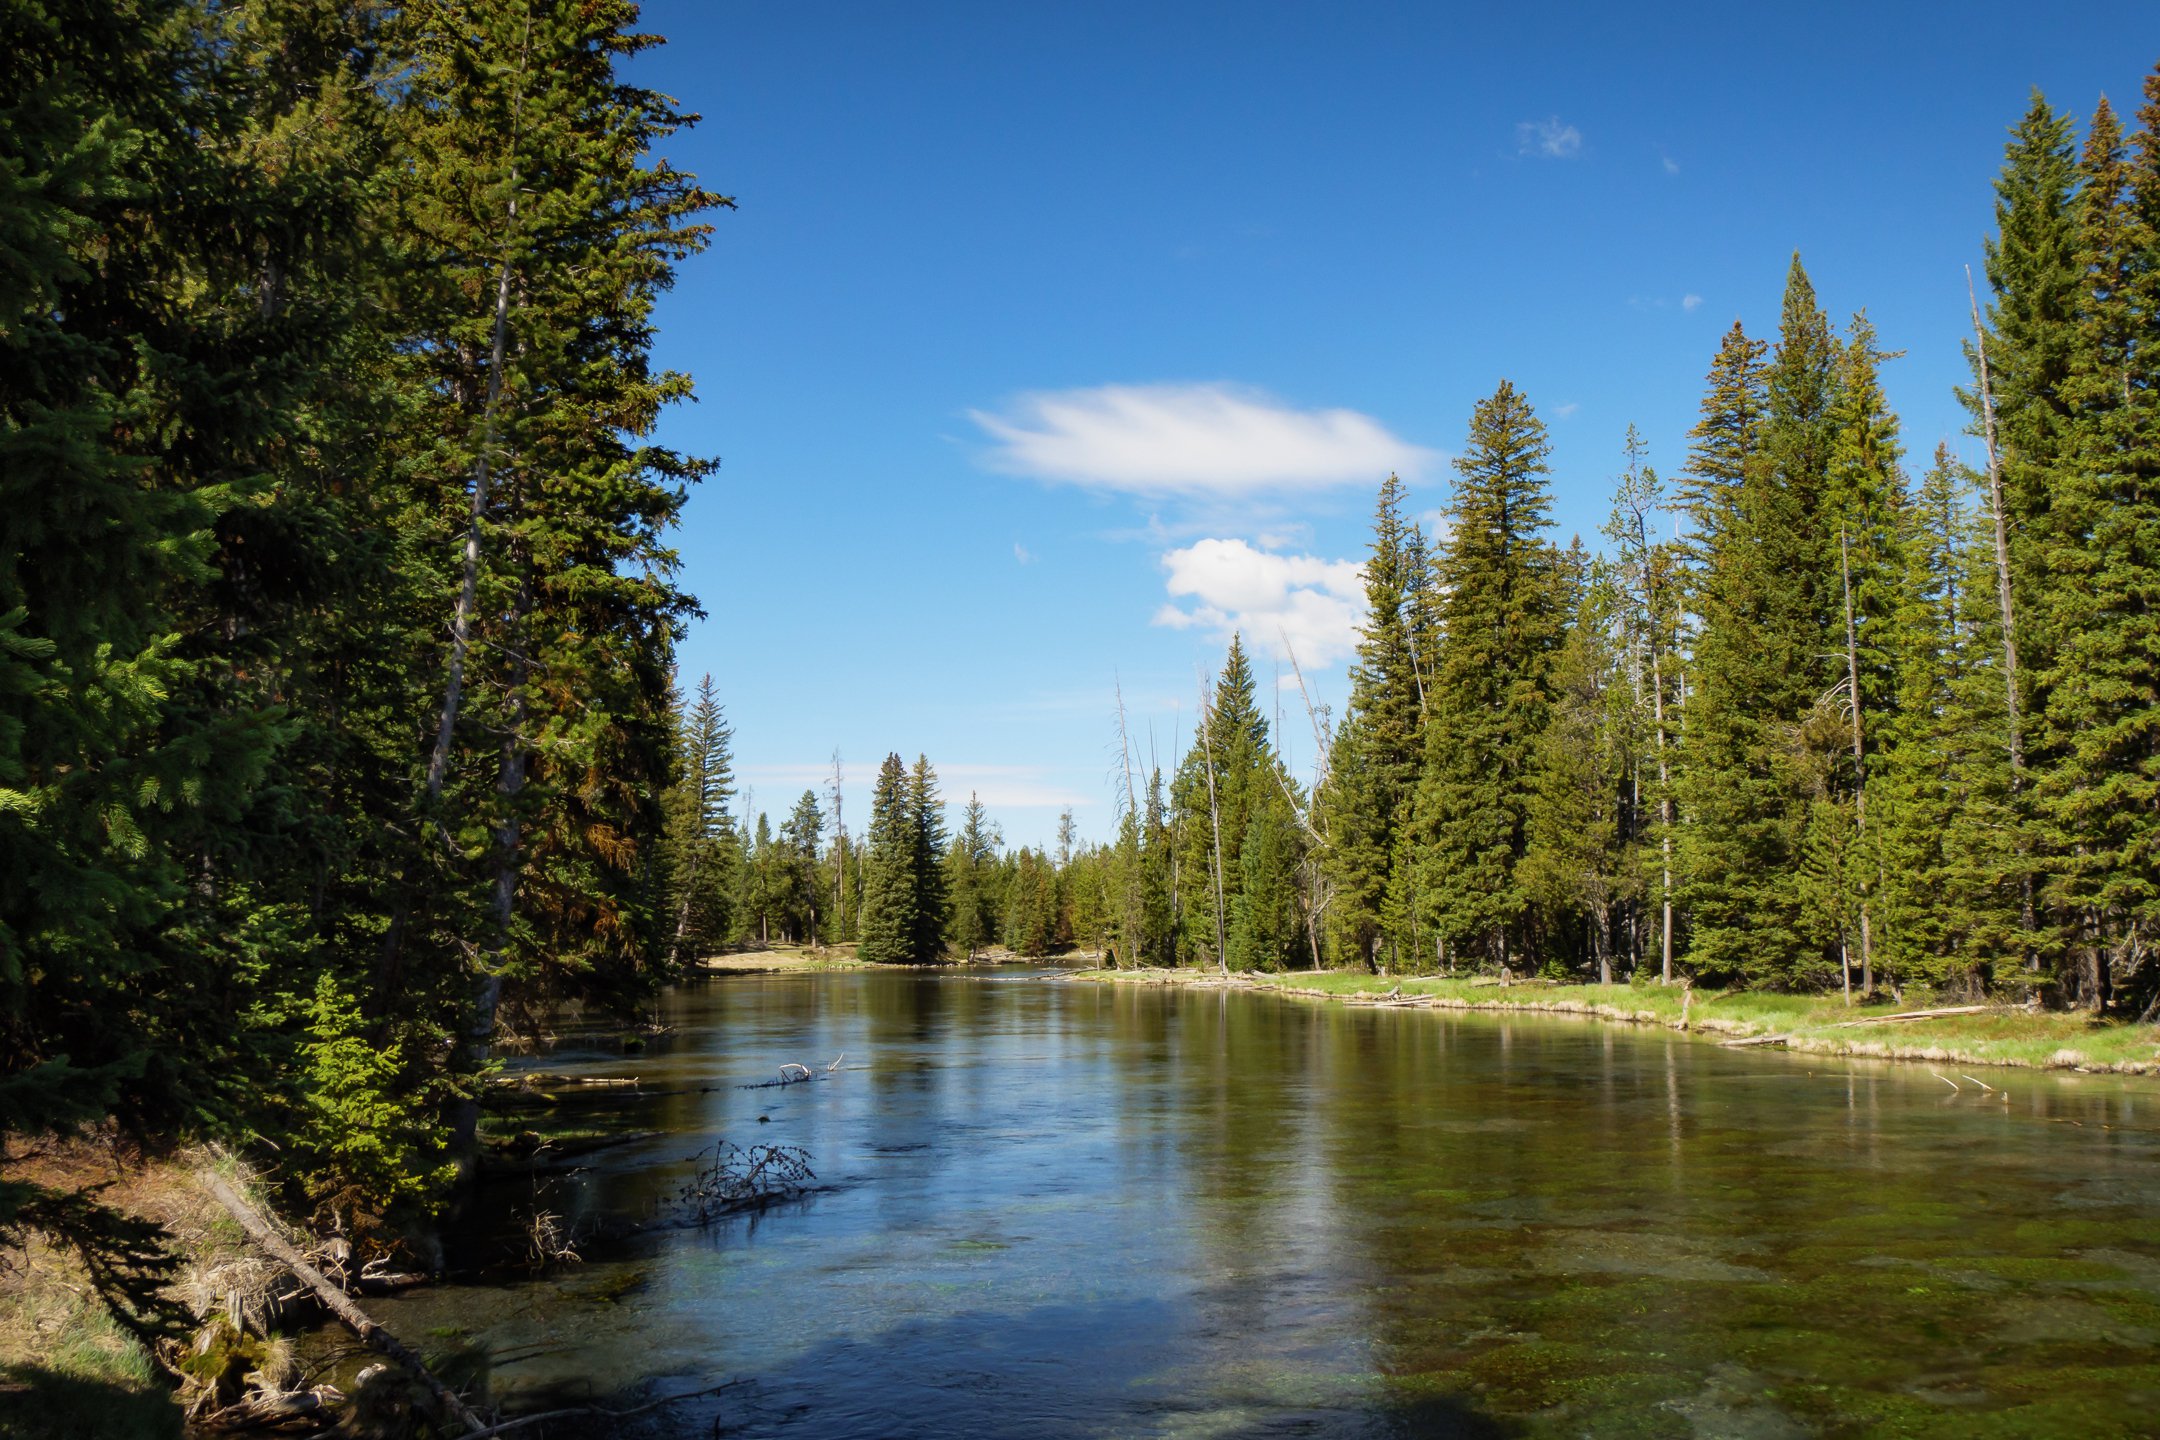 When you visit <a href="https://visitidaho.org/things-to-do/fishing/henrys-fork-of-the-snake/">Henry's Fork of the Snake River</a>, you're likely to see moose, geese, muskrat and blue heron — but it's what you don't see that will keep you coming back. Beneath the winding river, which traverses sprawling ranch land and timber-covered canyons, several species of hungry trout, including rainbows and browns, await your bait.